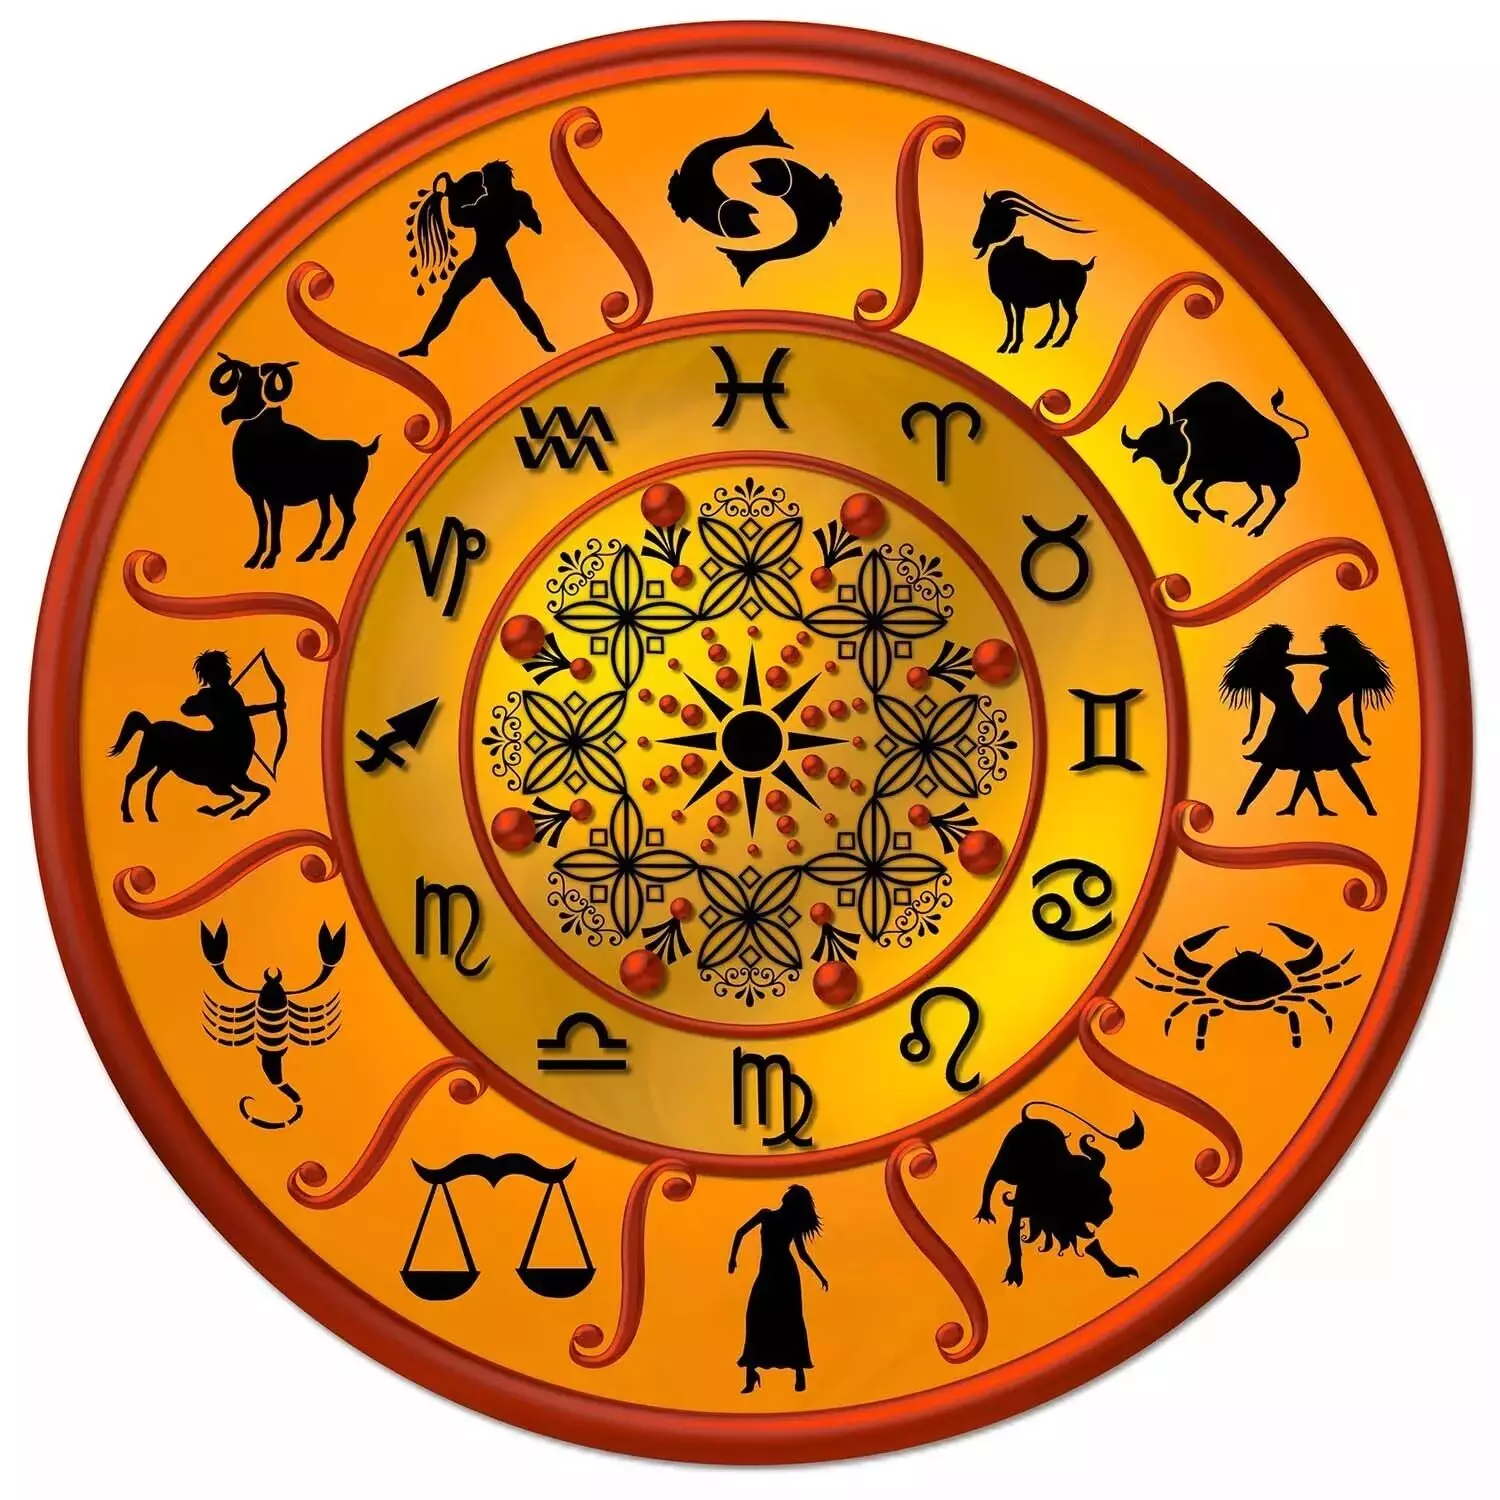 09 September  – Know your todays horoscope